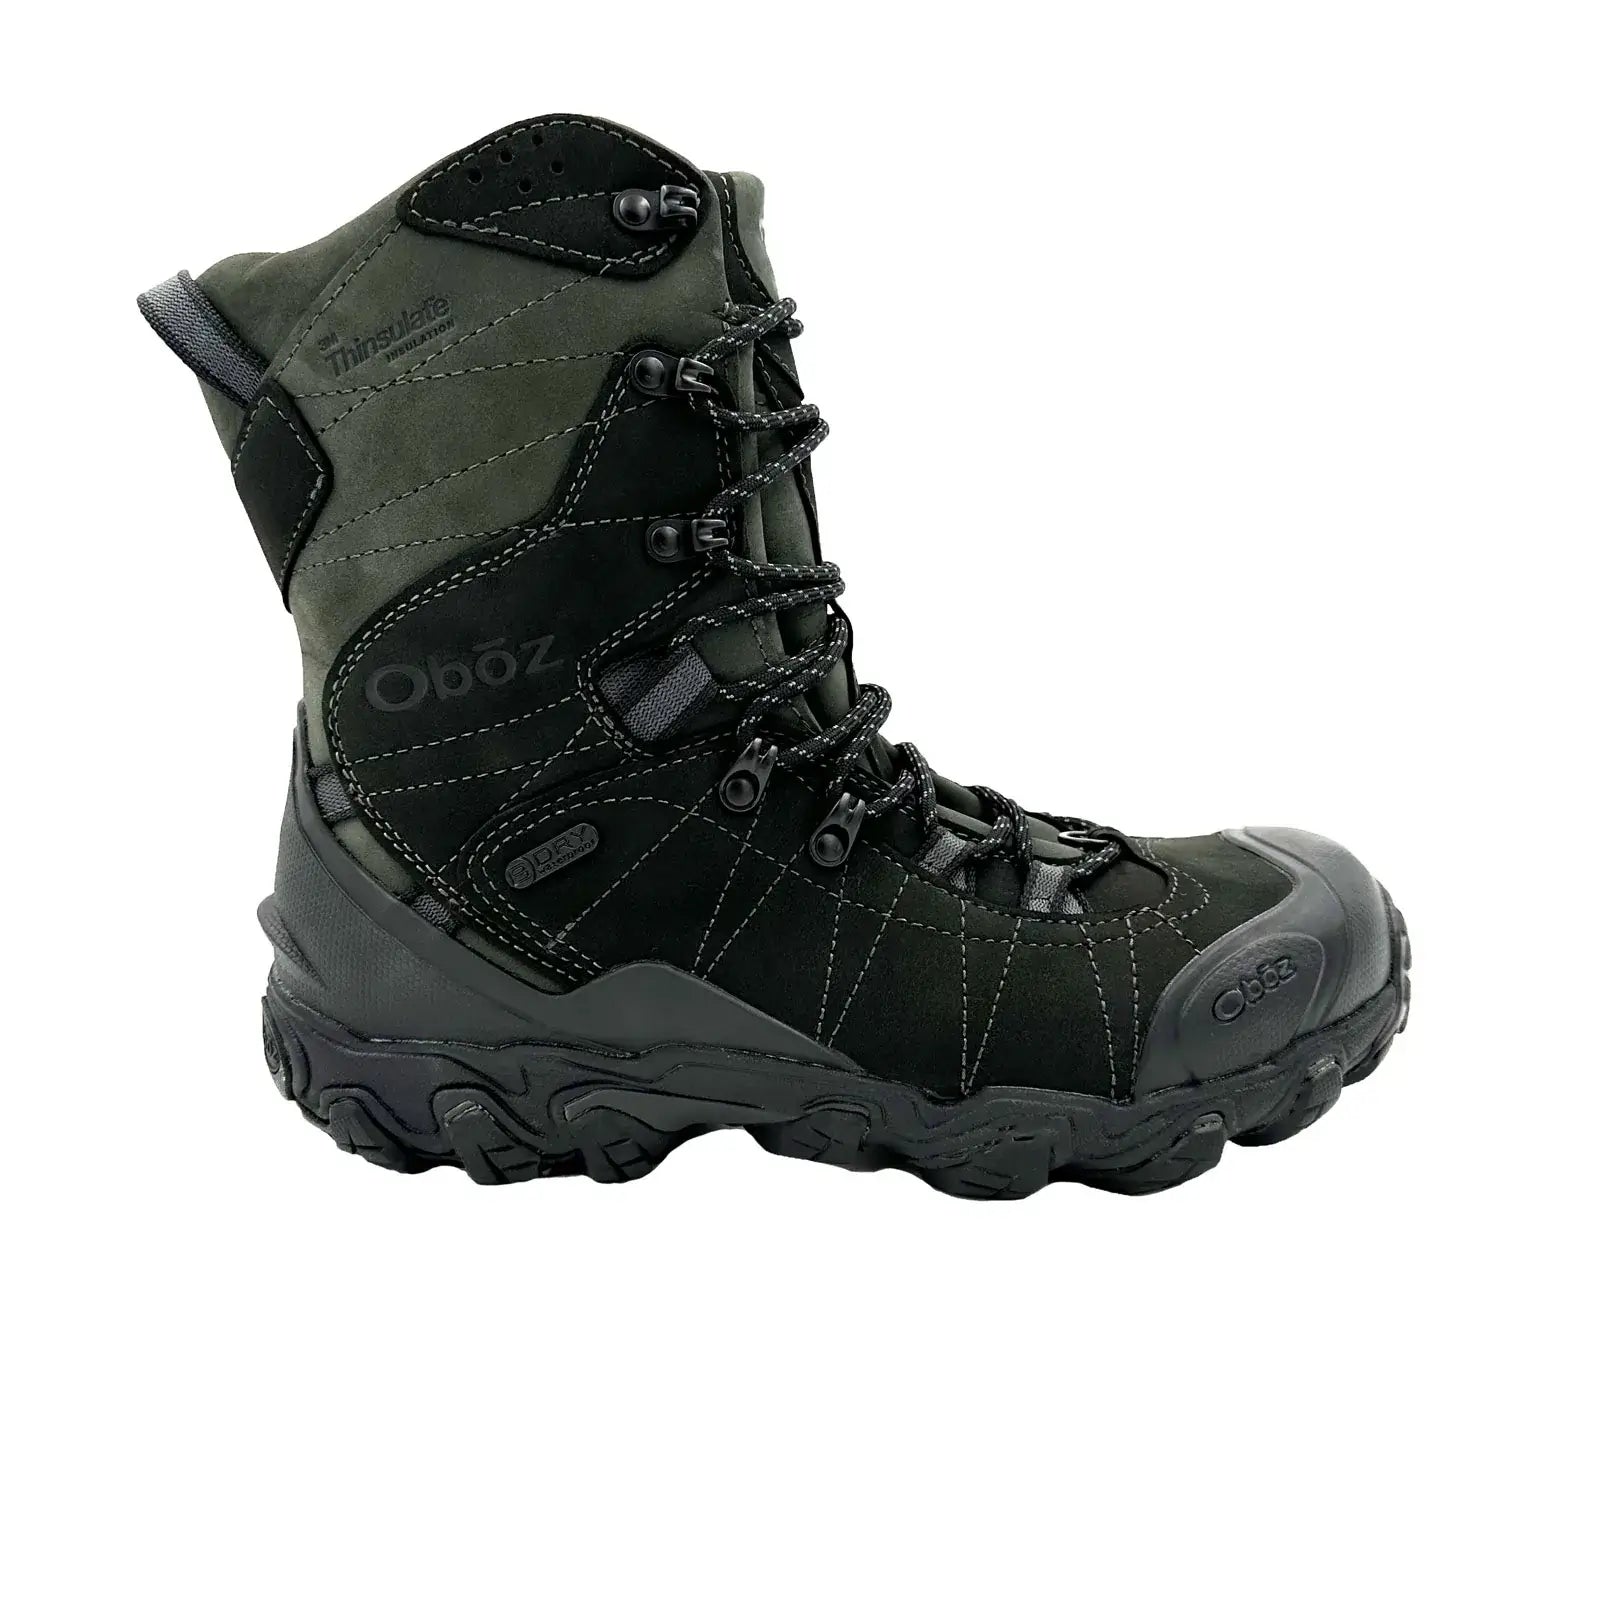 Oboz Bridger 10" Insulated B DRY Boot (Men) - Carbon Black Boots - Hiking - High - The Heel Shoe Fitters